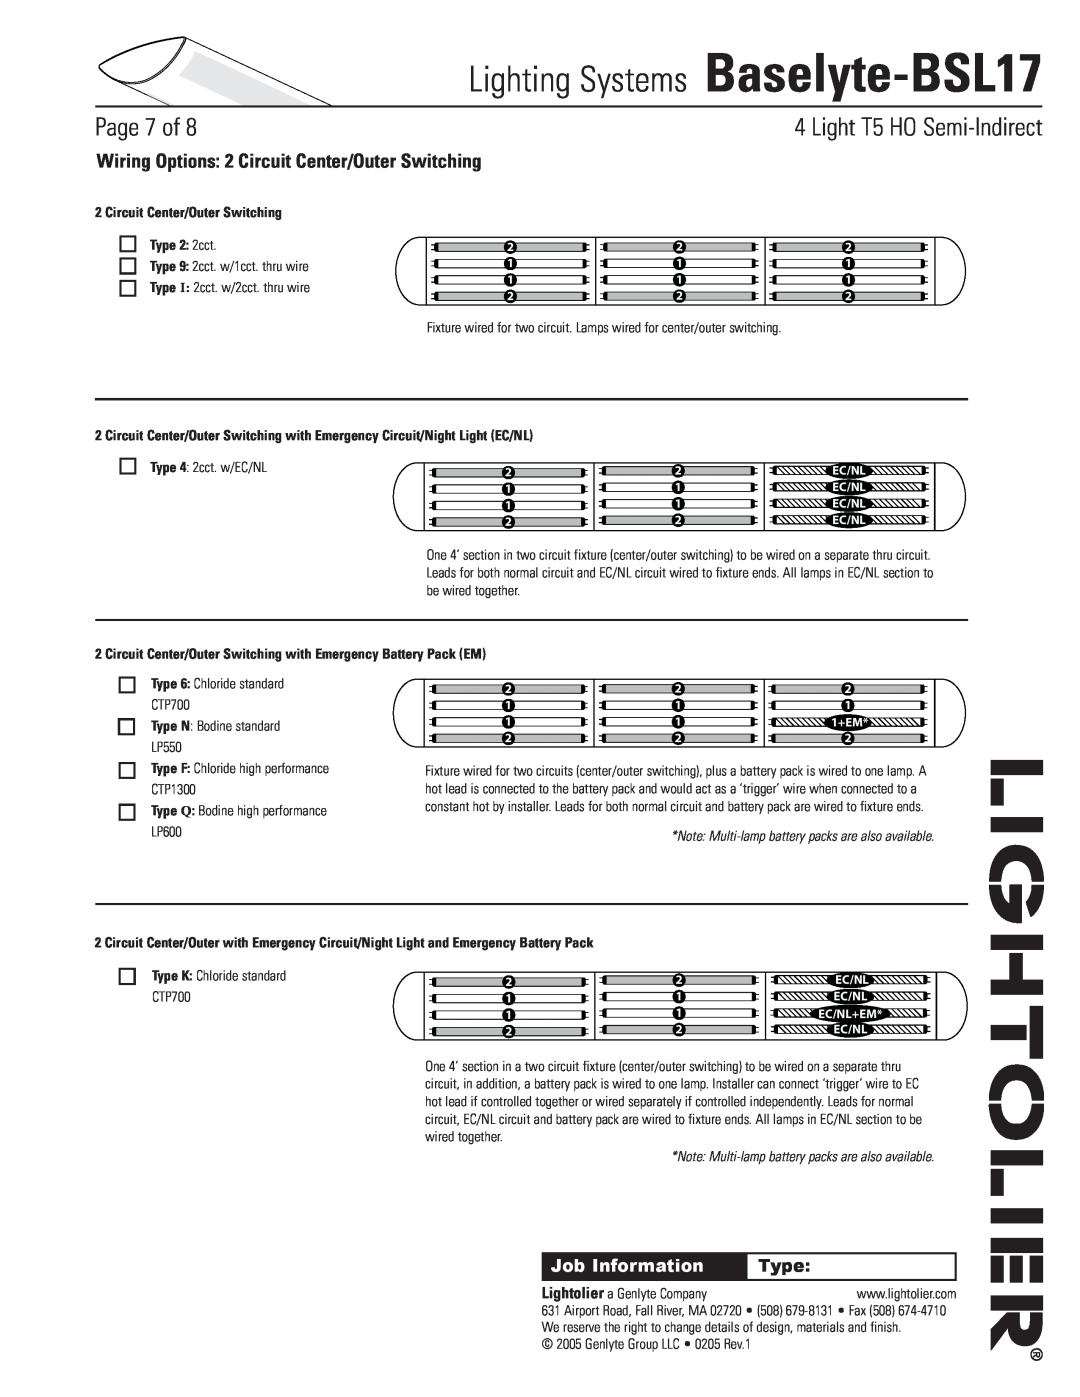 Lightolier Baselyte-BSL17 Wiring Options 2 Circuit Center/Outer Switching, Circuit Center/Outer Switching Type 2 2cct 